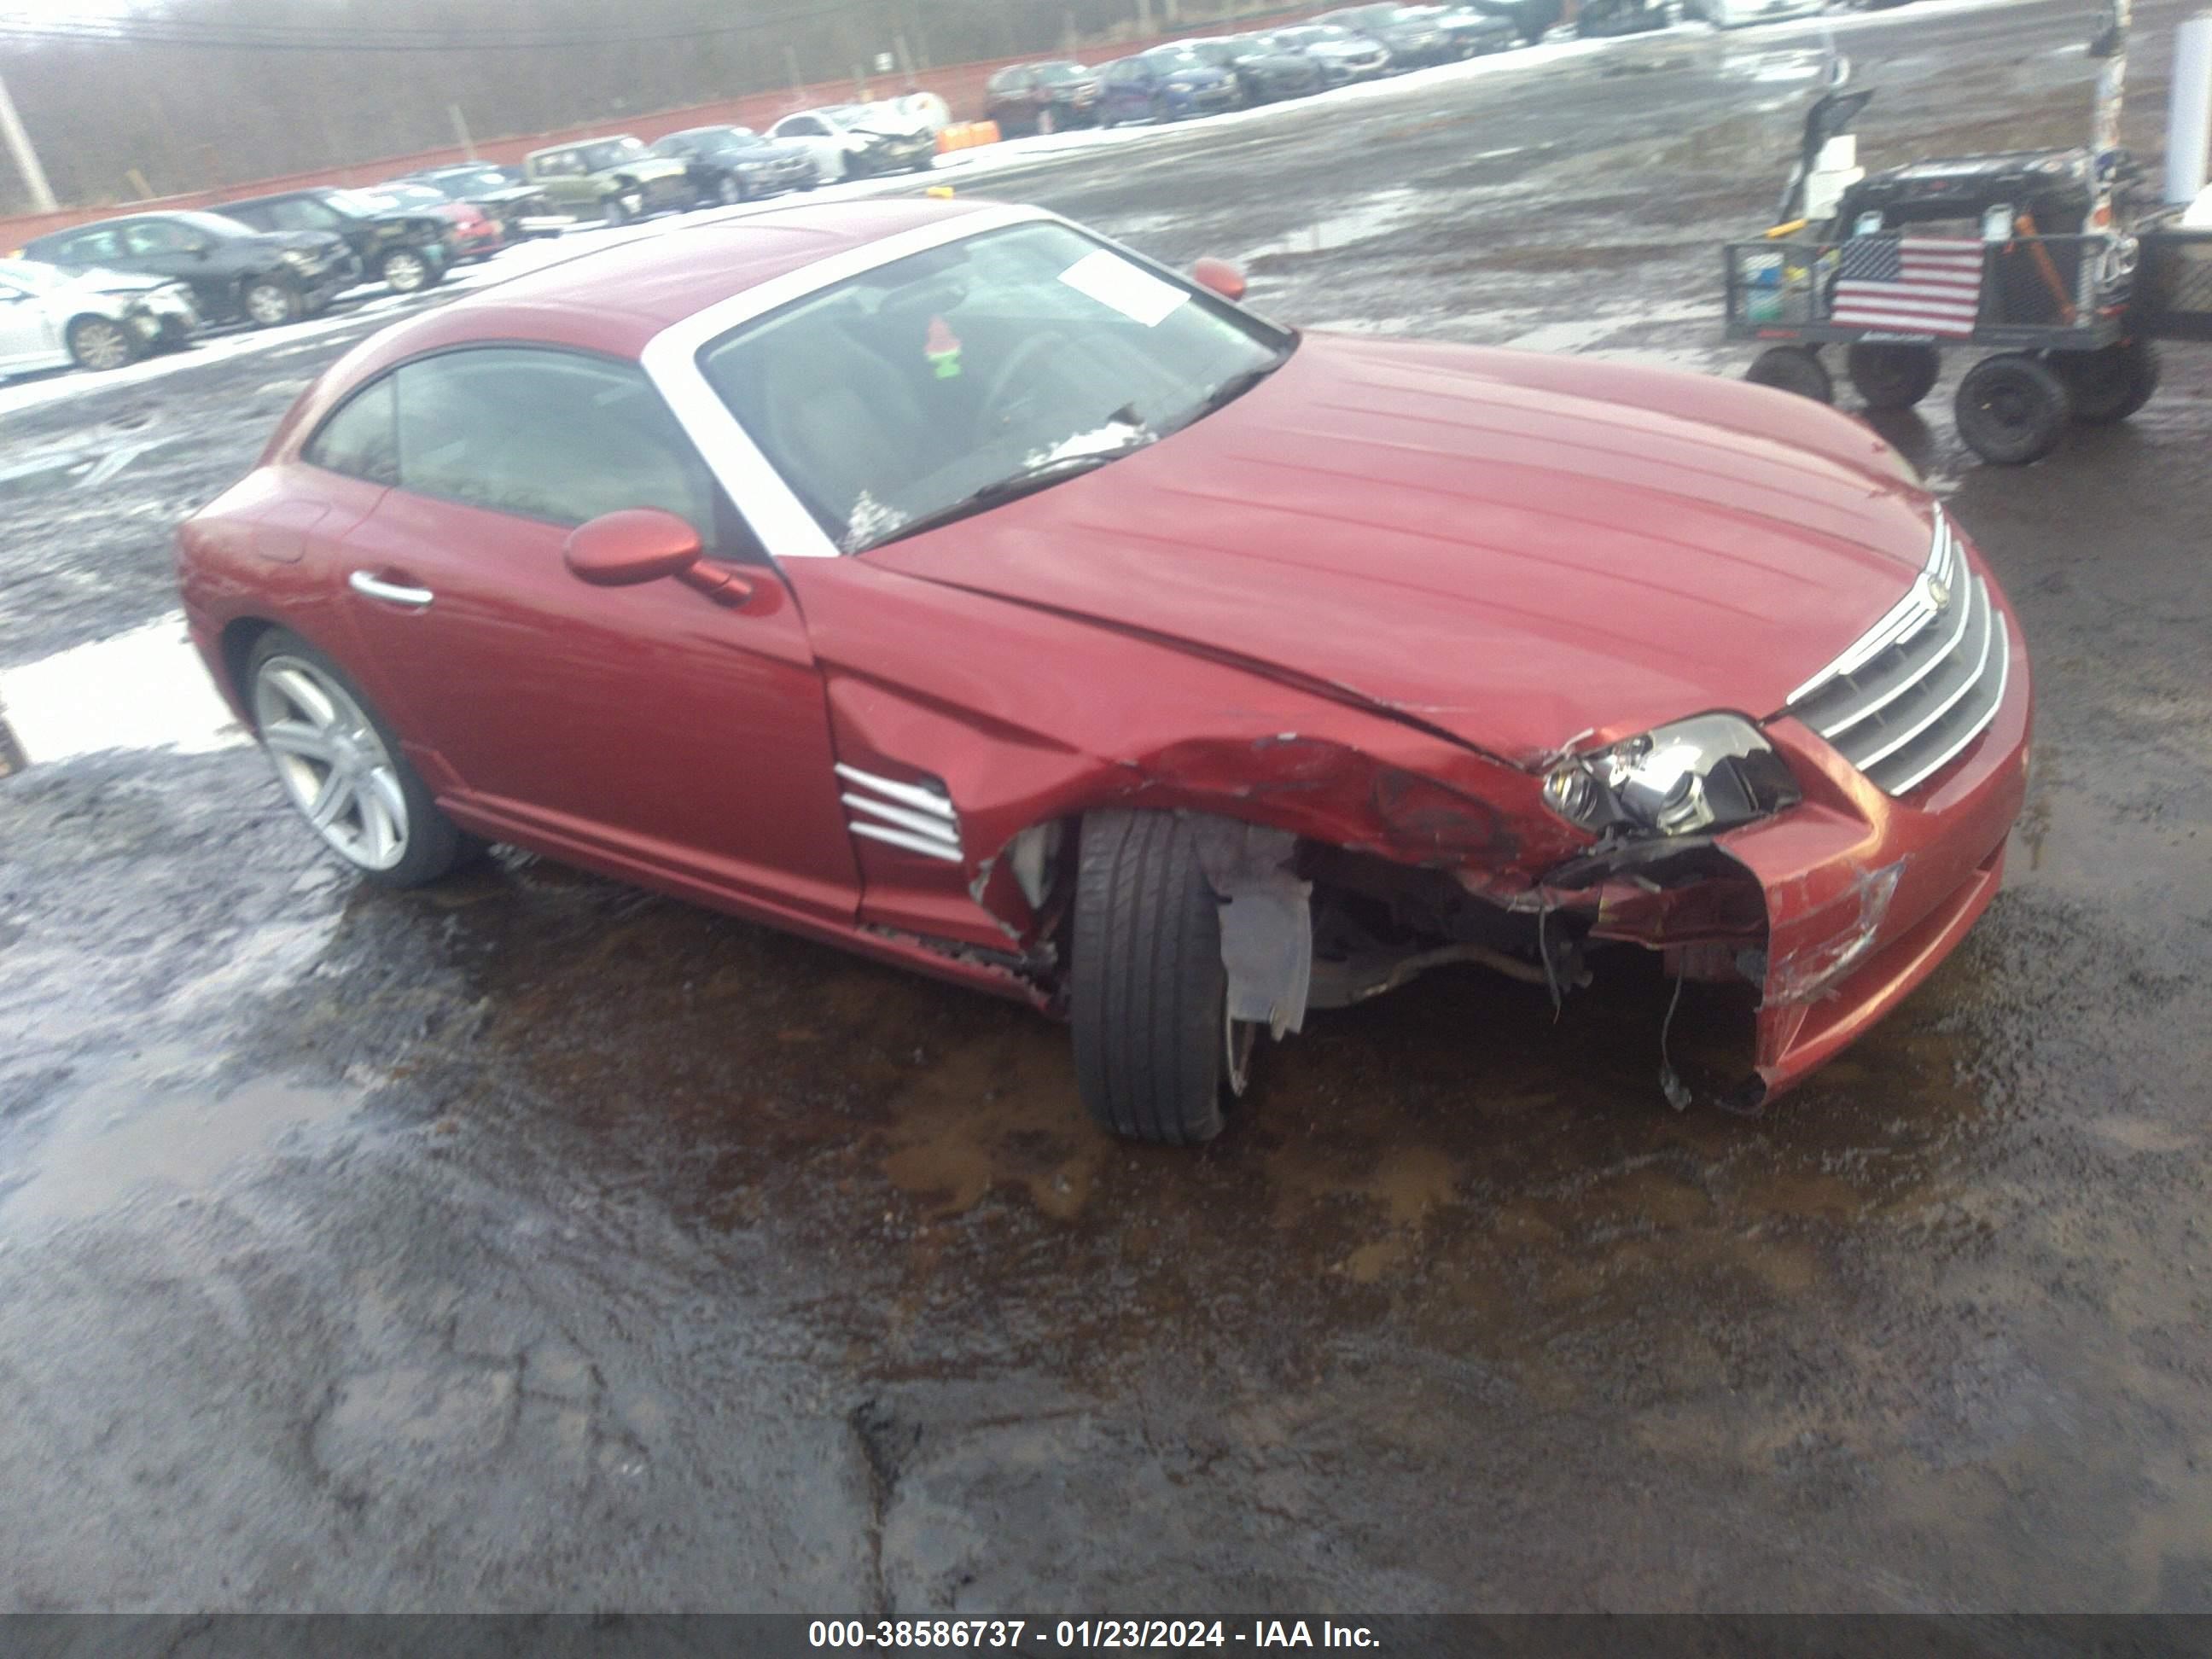 vin: 1C3AN69L66X065042 1C3AN69L66X065042 2006 chrysler crossfire 3200 for Sale in 08872, 580 Jernee Mill Rd, Sayreville, USA